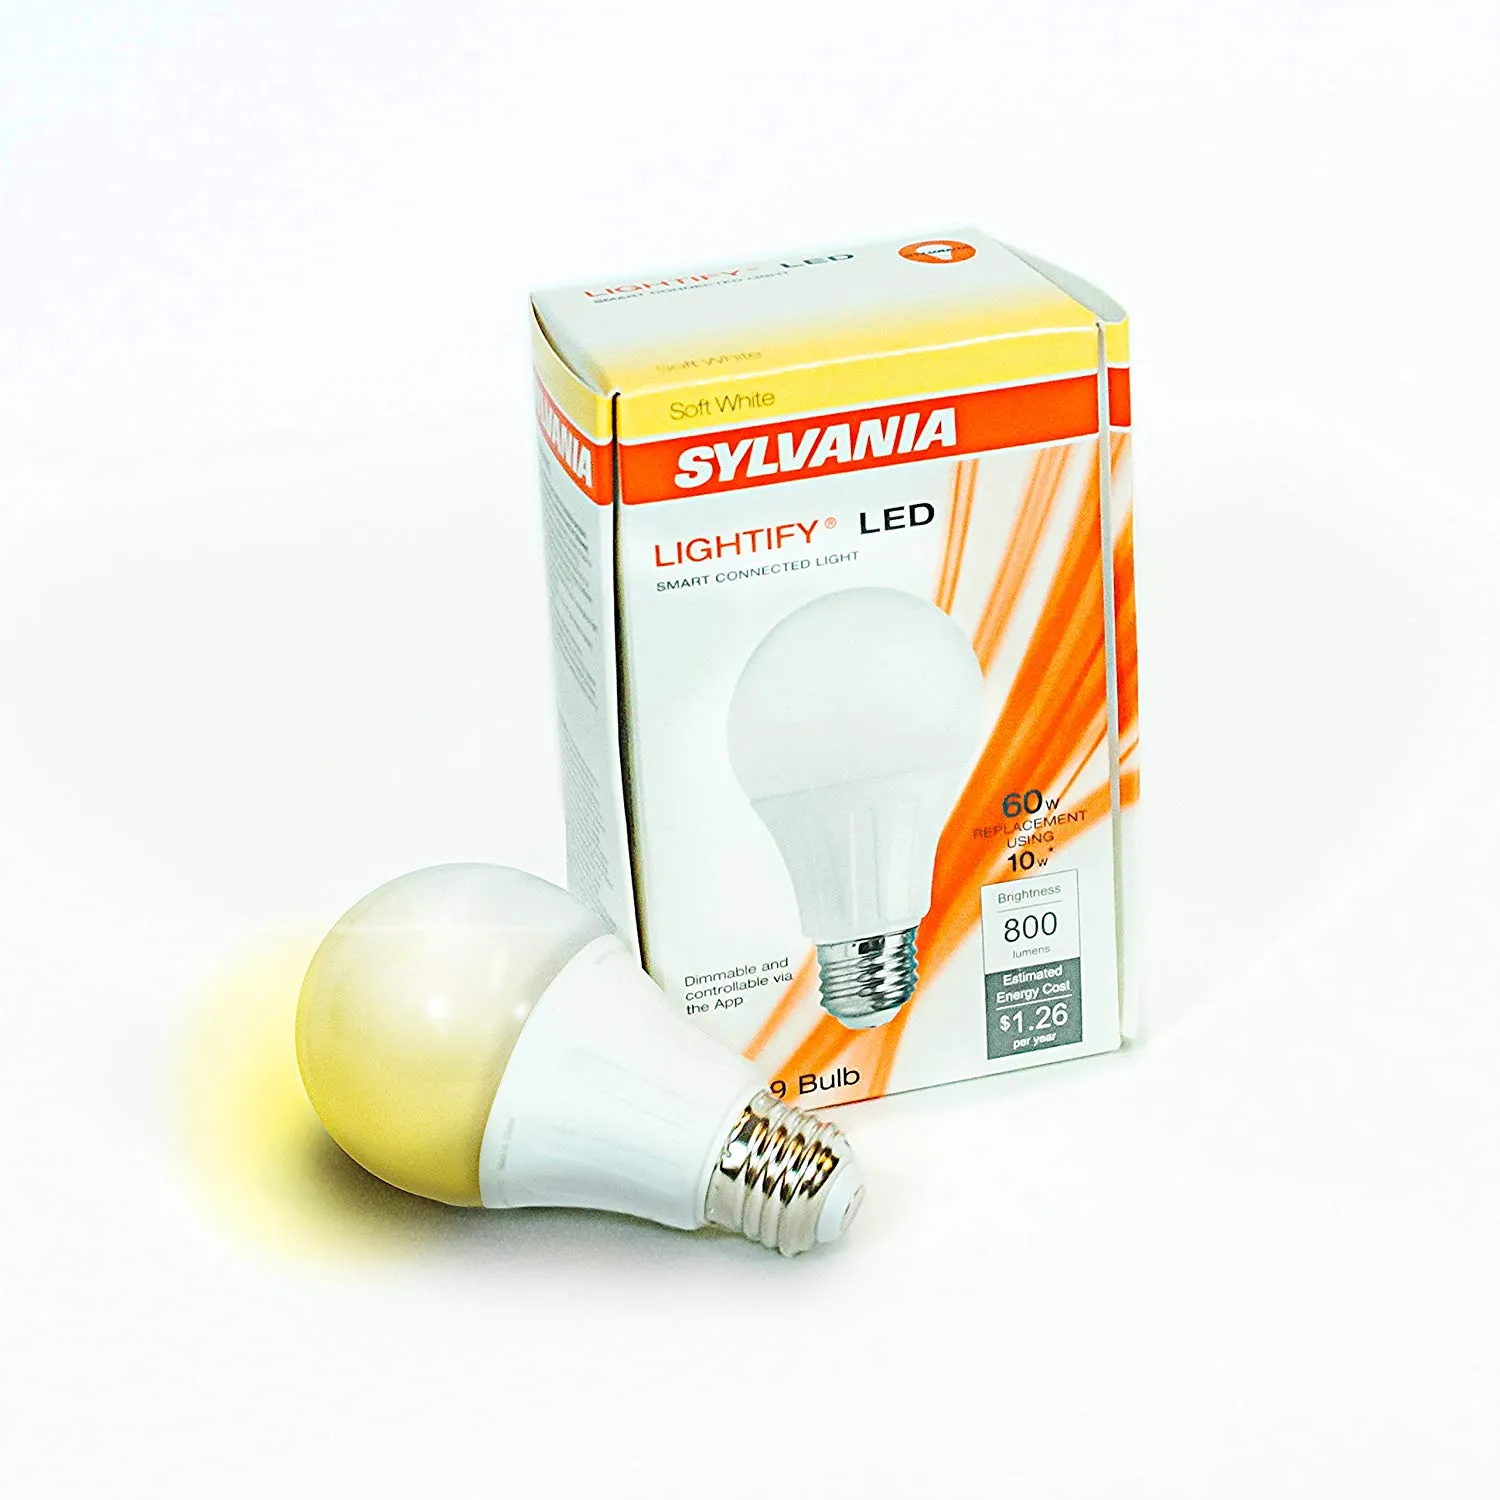 Smart+ Soft White Dimmable A19 Bulb